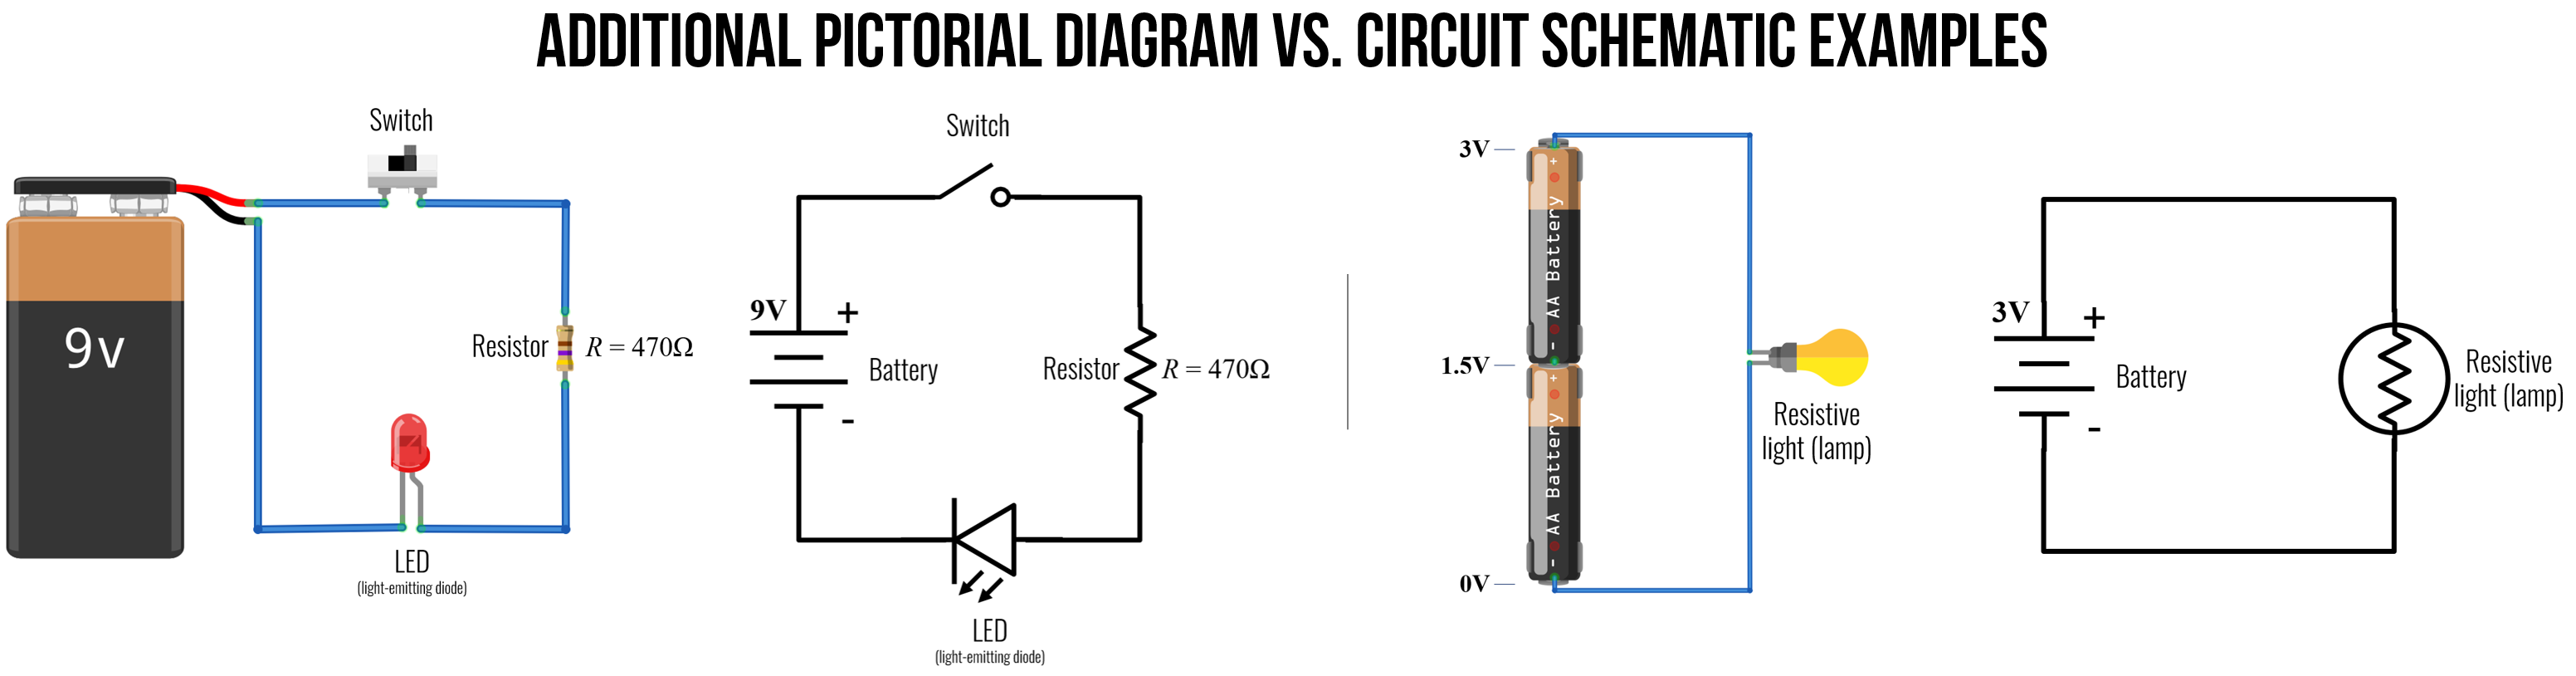 Two additional pictorial diagrams. vs. circuit schematics